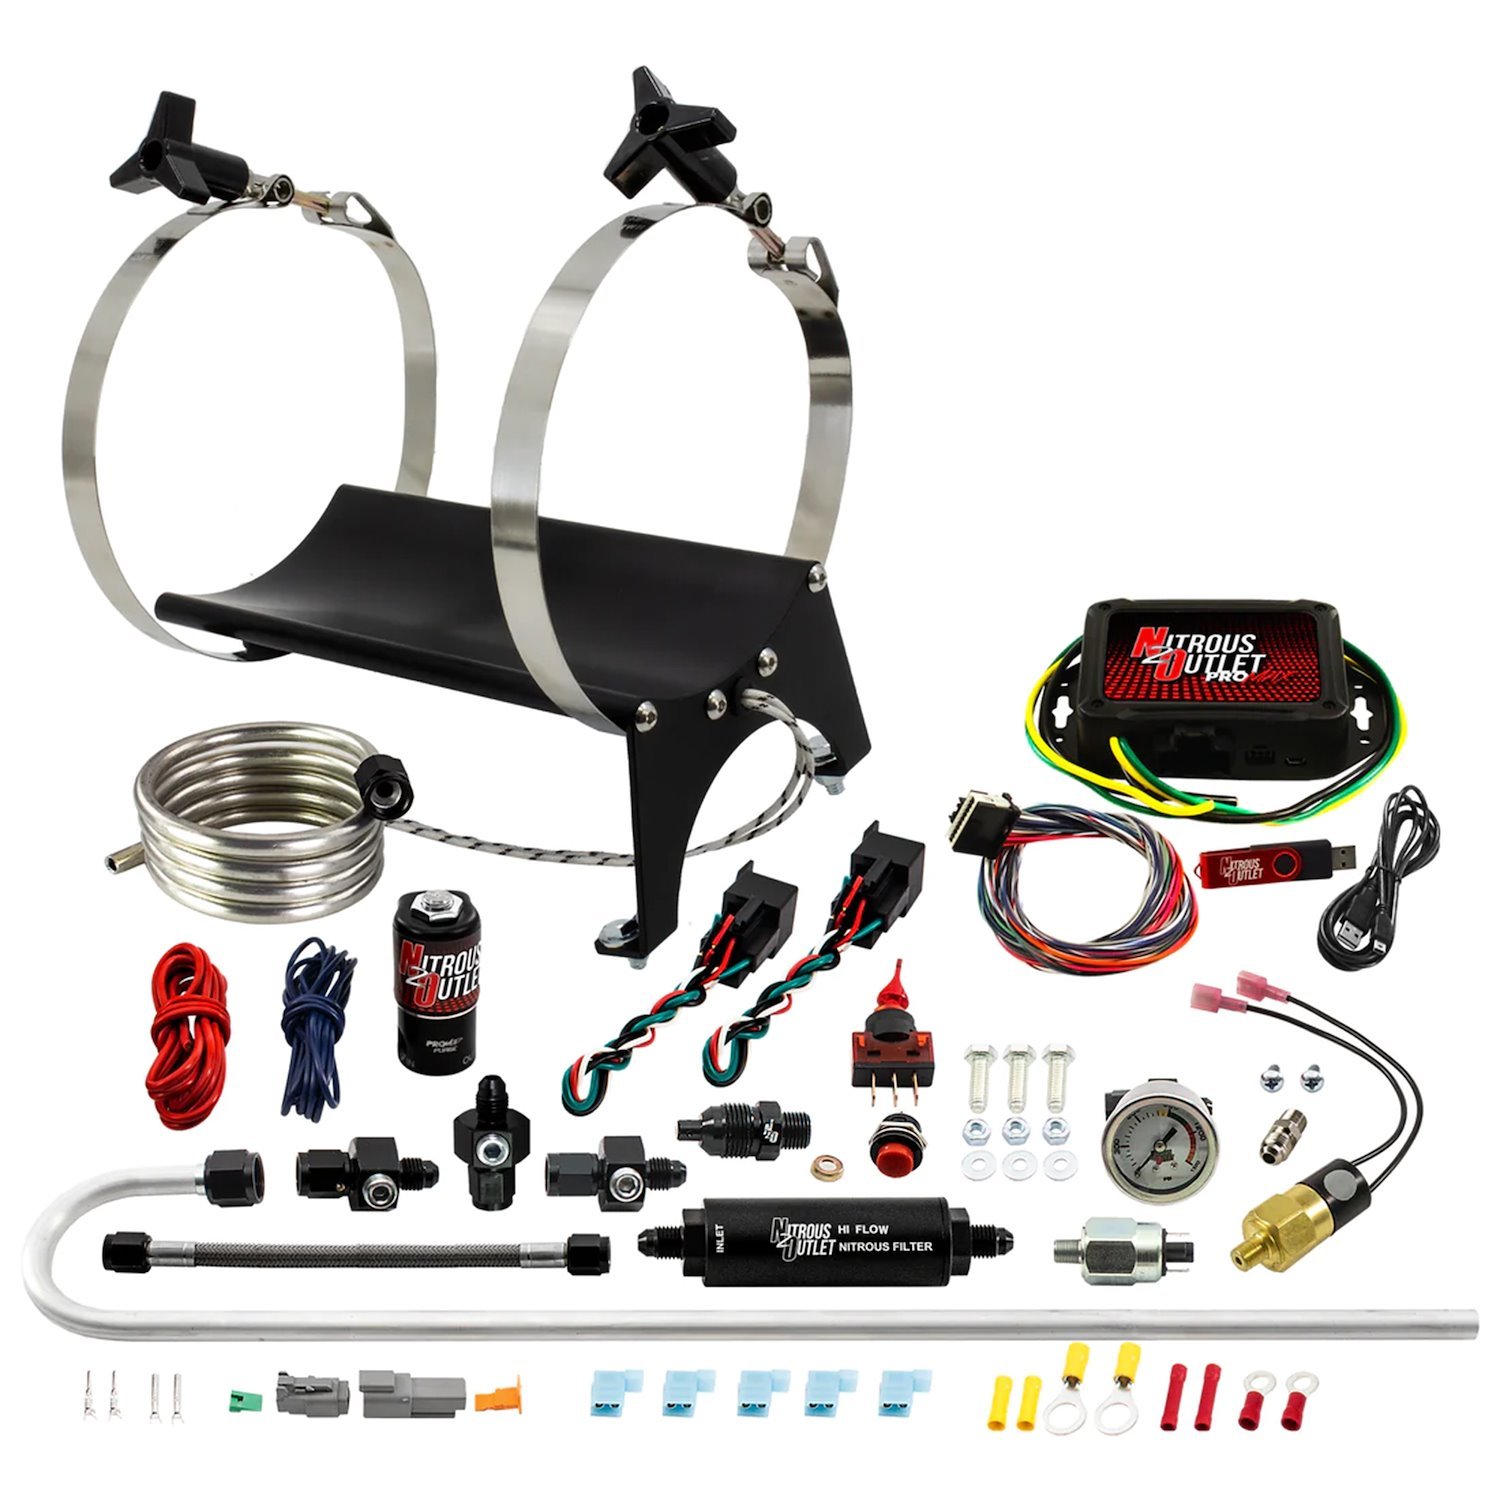 00-69003-L4 Ultimate Nitrous Accessory Package, ProMax, Low Fuel Pressure/4AN